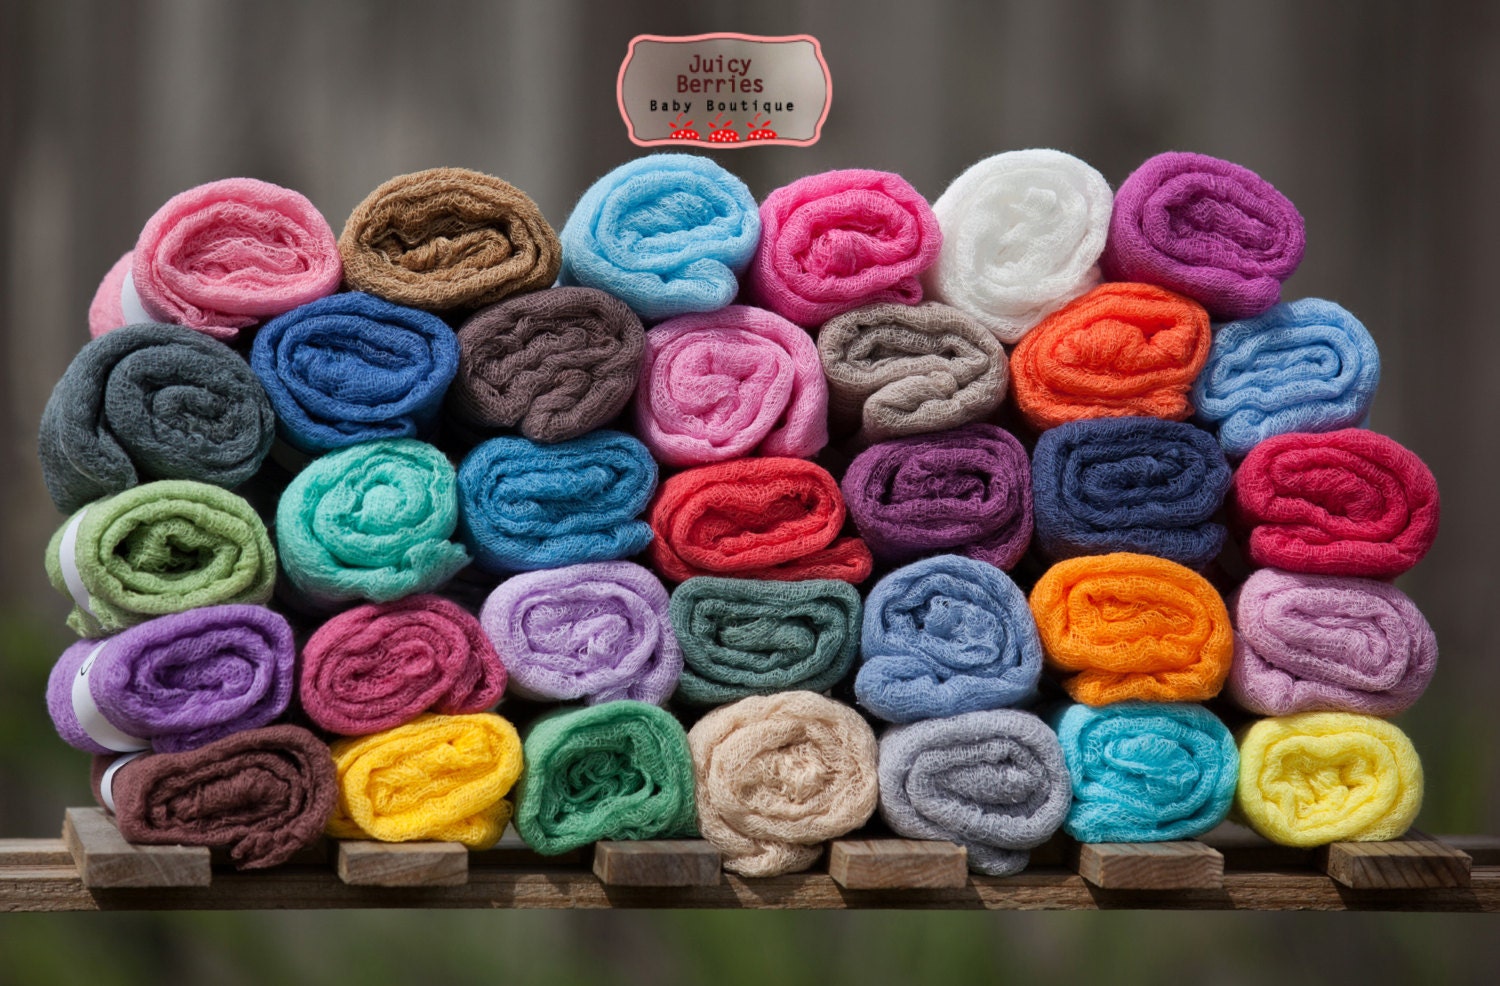 34 Colors - Pick 5 Colors Of Cheesecloth, Cheesecloth Wraps, Photo Prop, Newborn Photography, Newborn Wrap - JuicyBerries